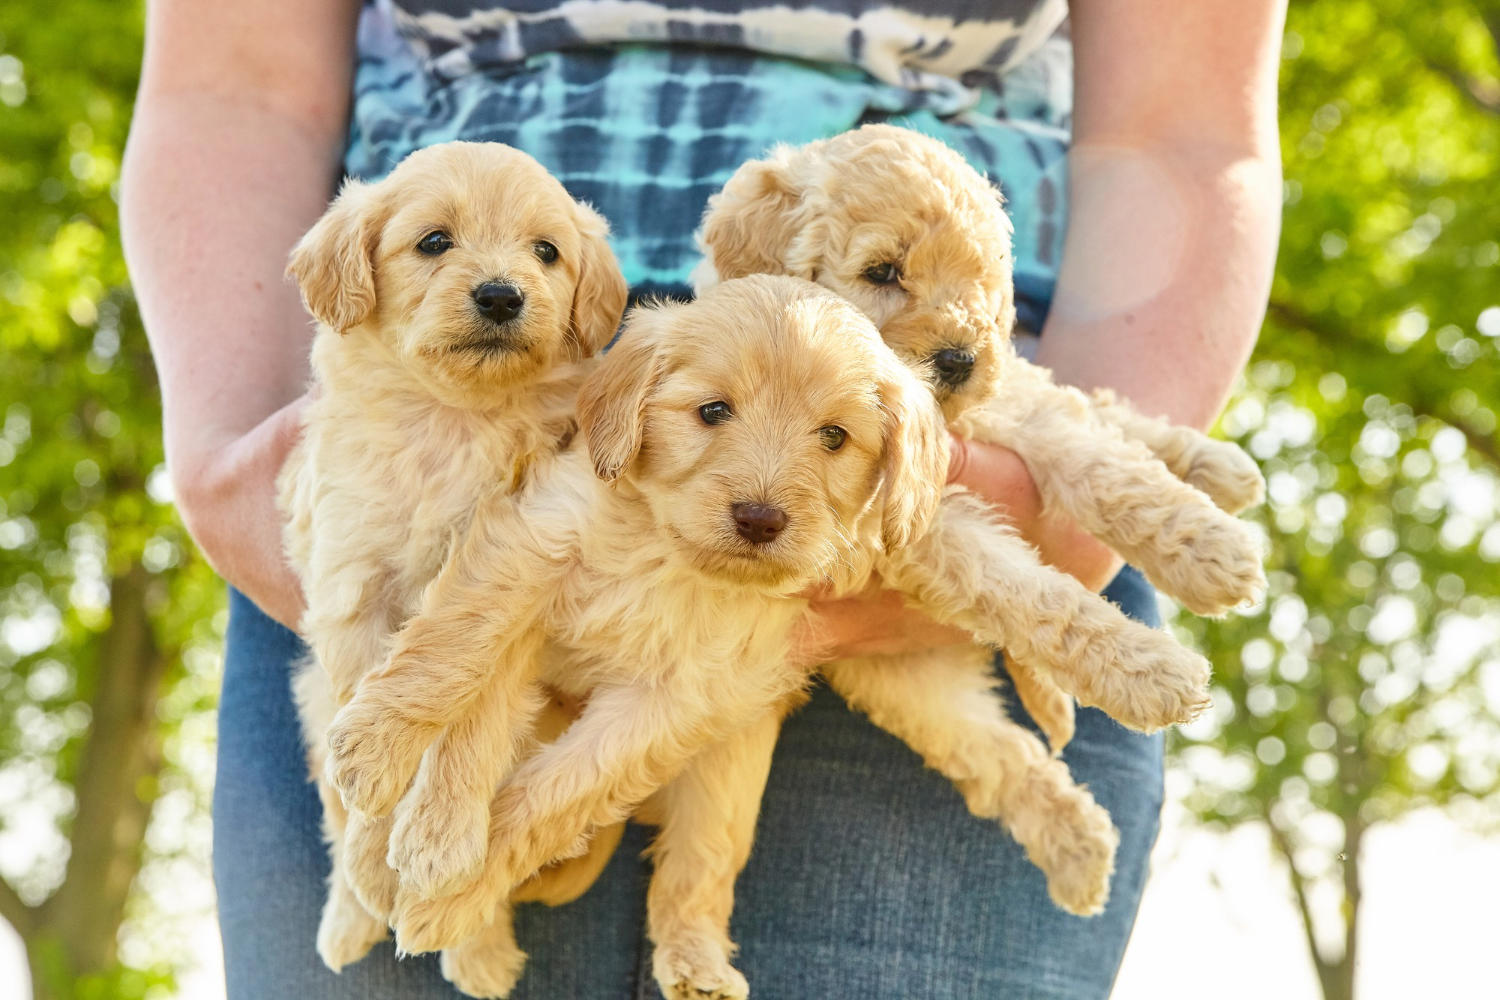 "The Benefits and Potential Risks of Feeding a Grain-Free Diet to Your Goldendoodle"